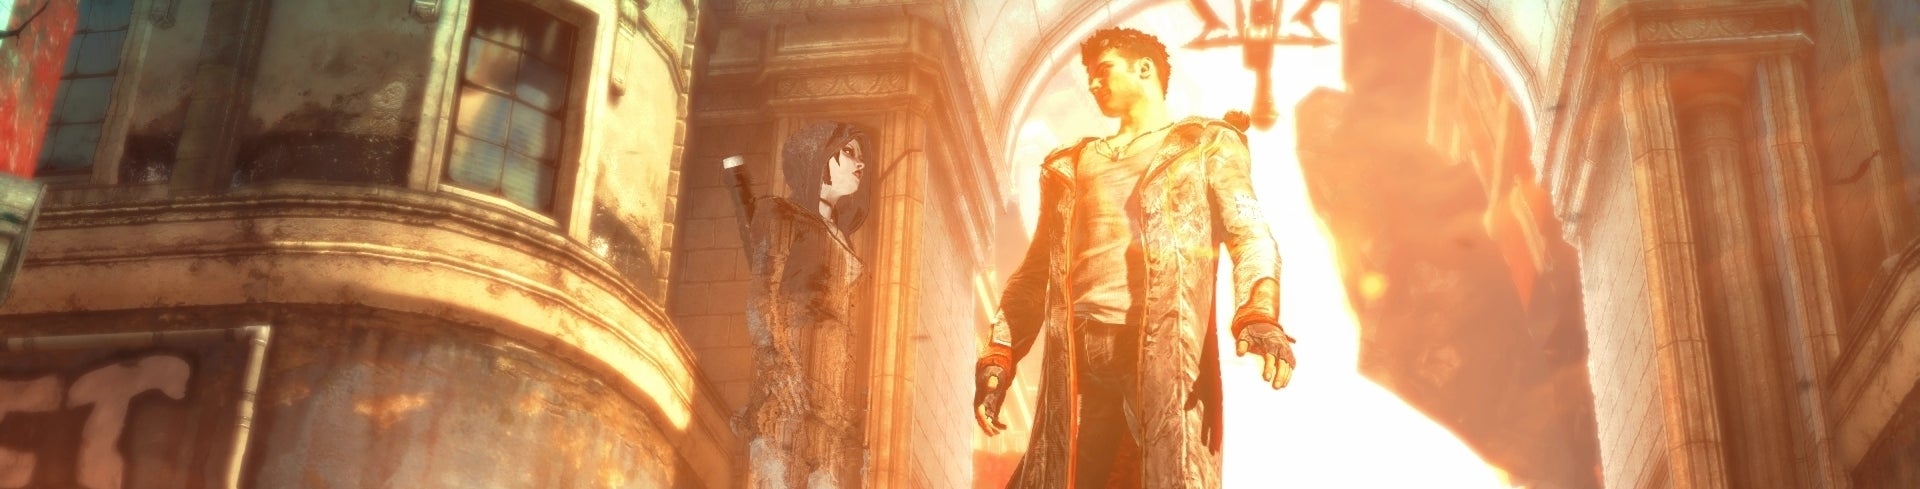 Image for DmC PC - the definitive Devil May Cry experience?